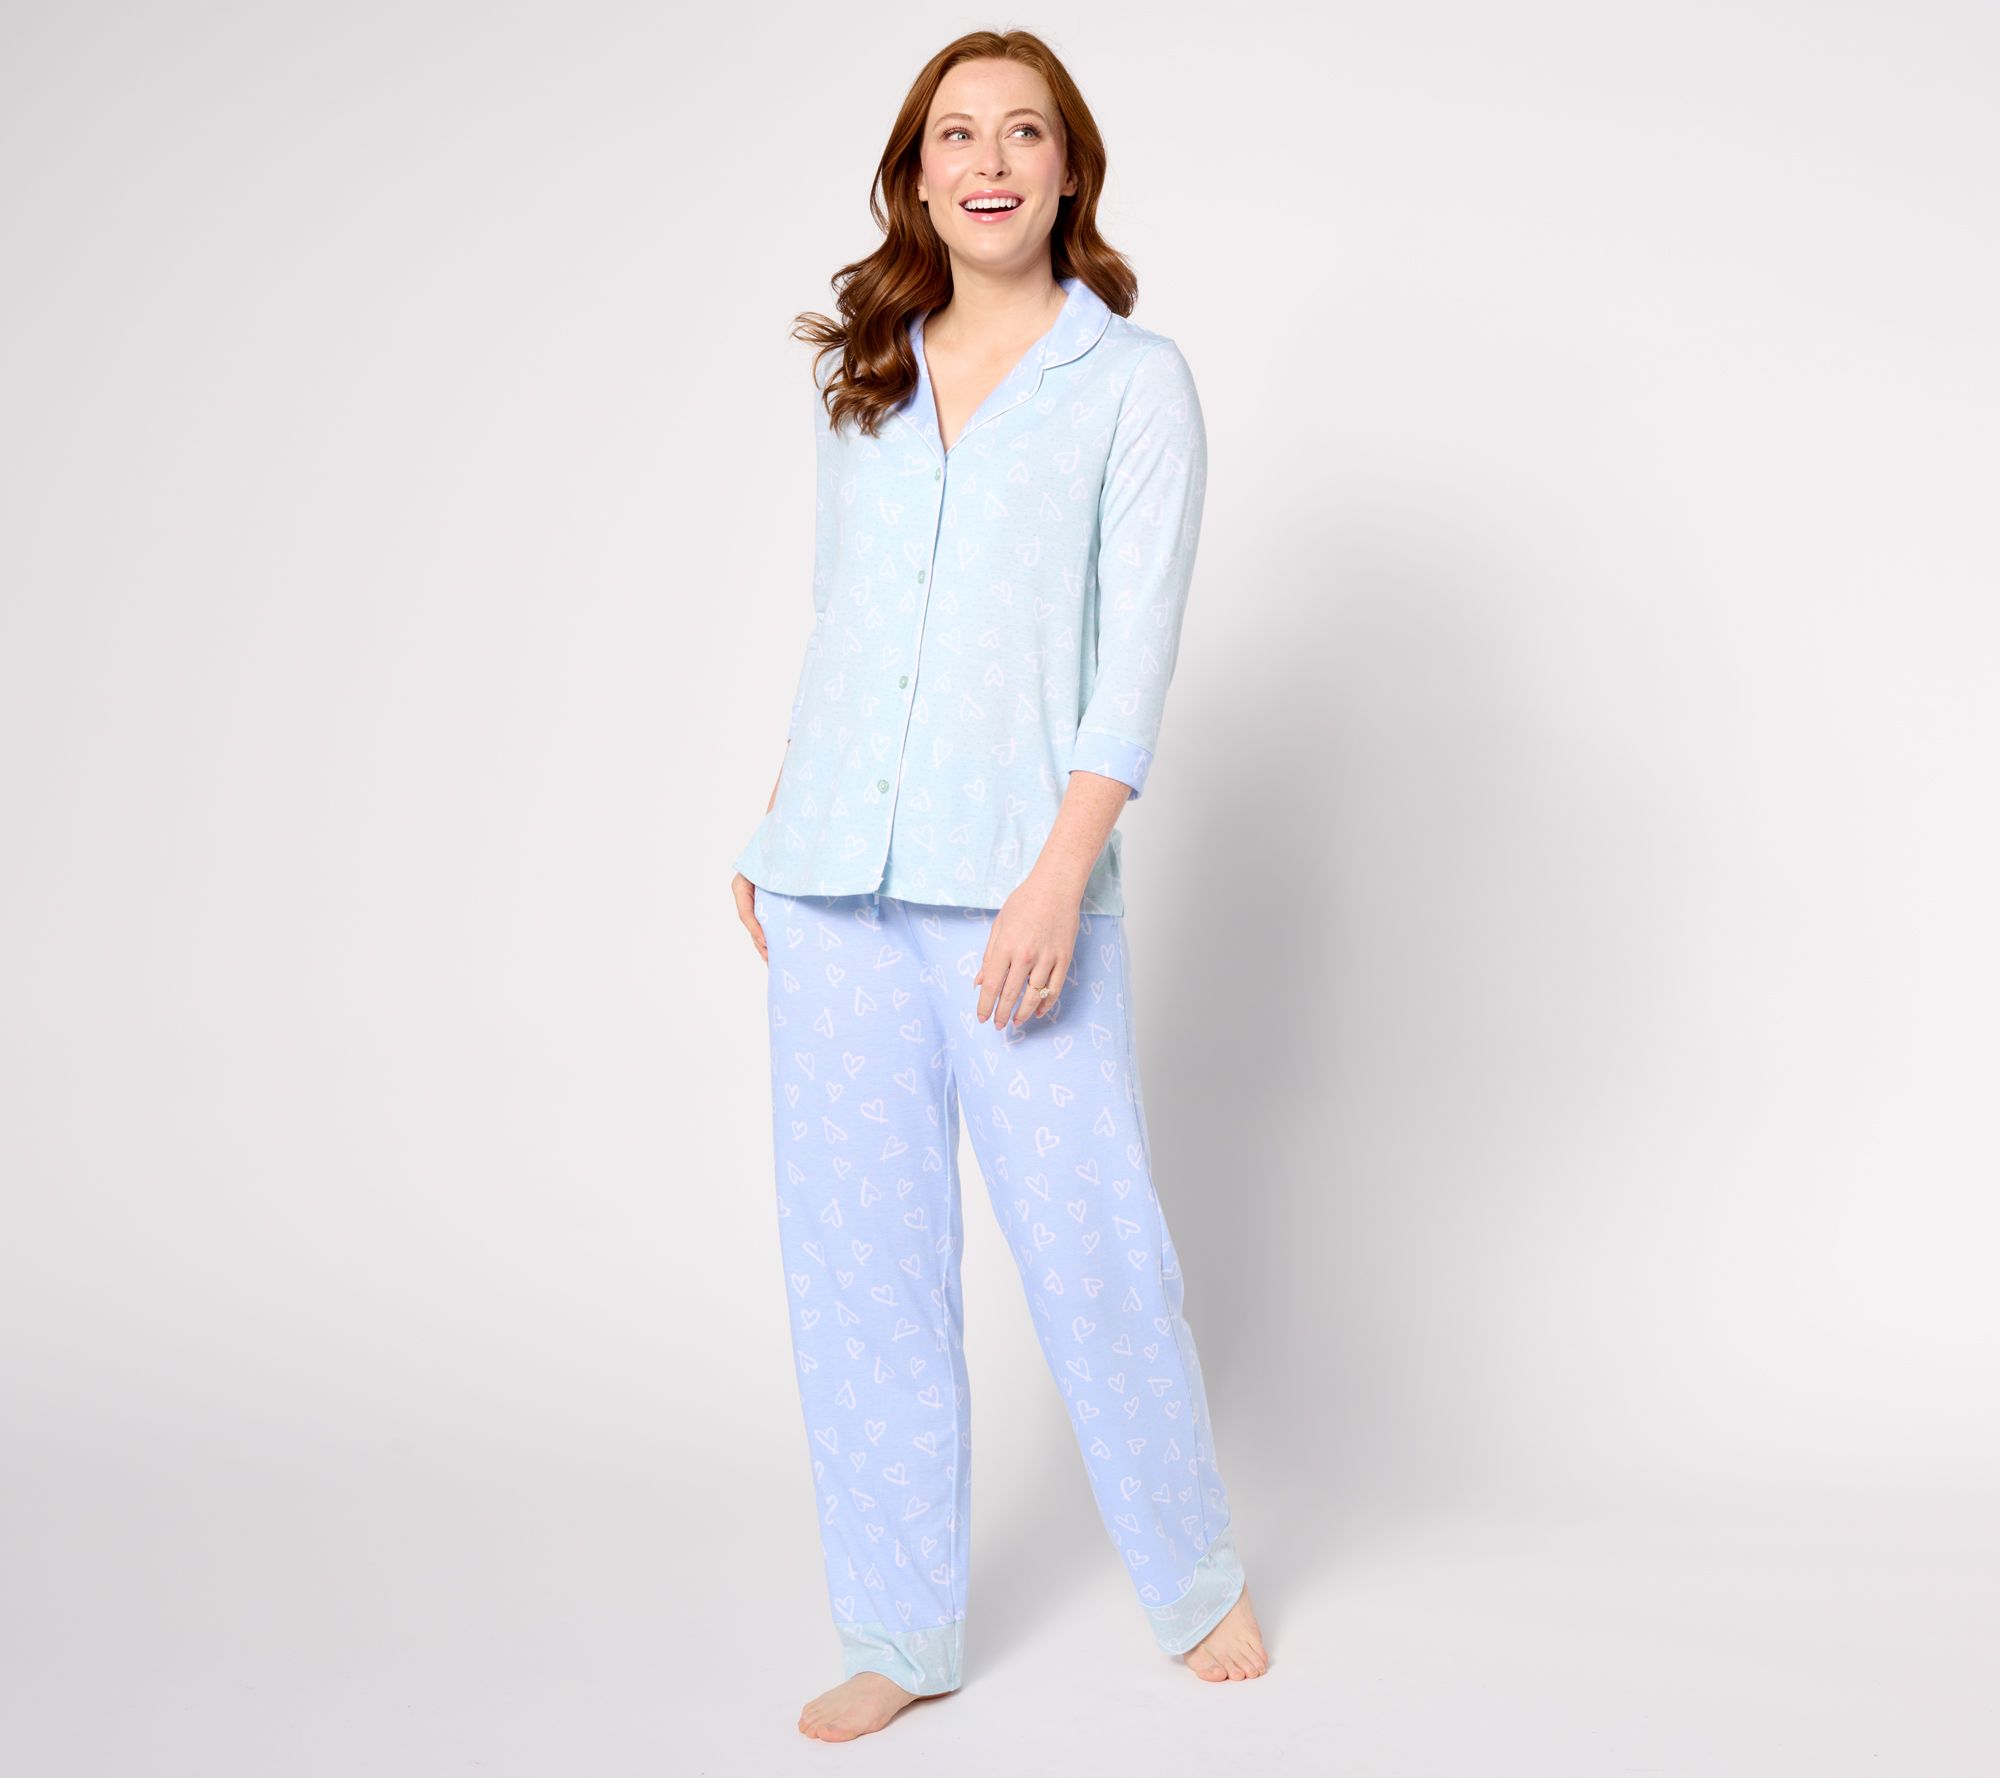 Kid's Twill Pajama Set in Easter Gardens